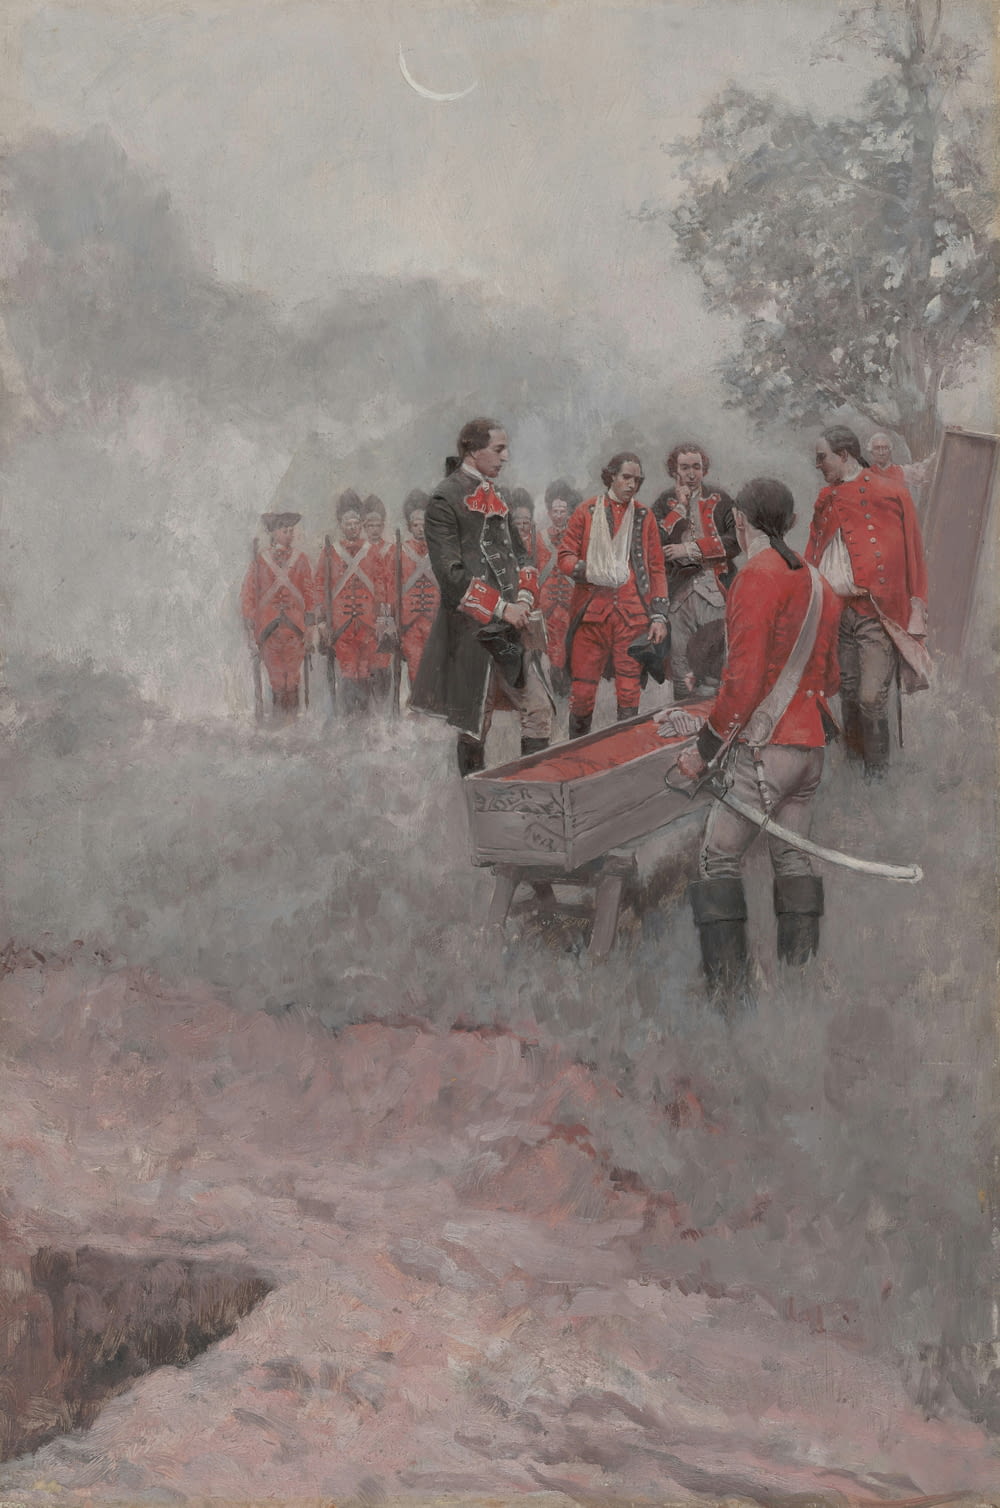 a painting of a group of men in red uniforms